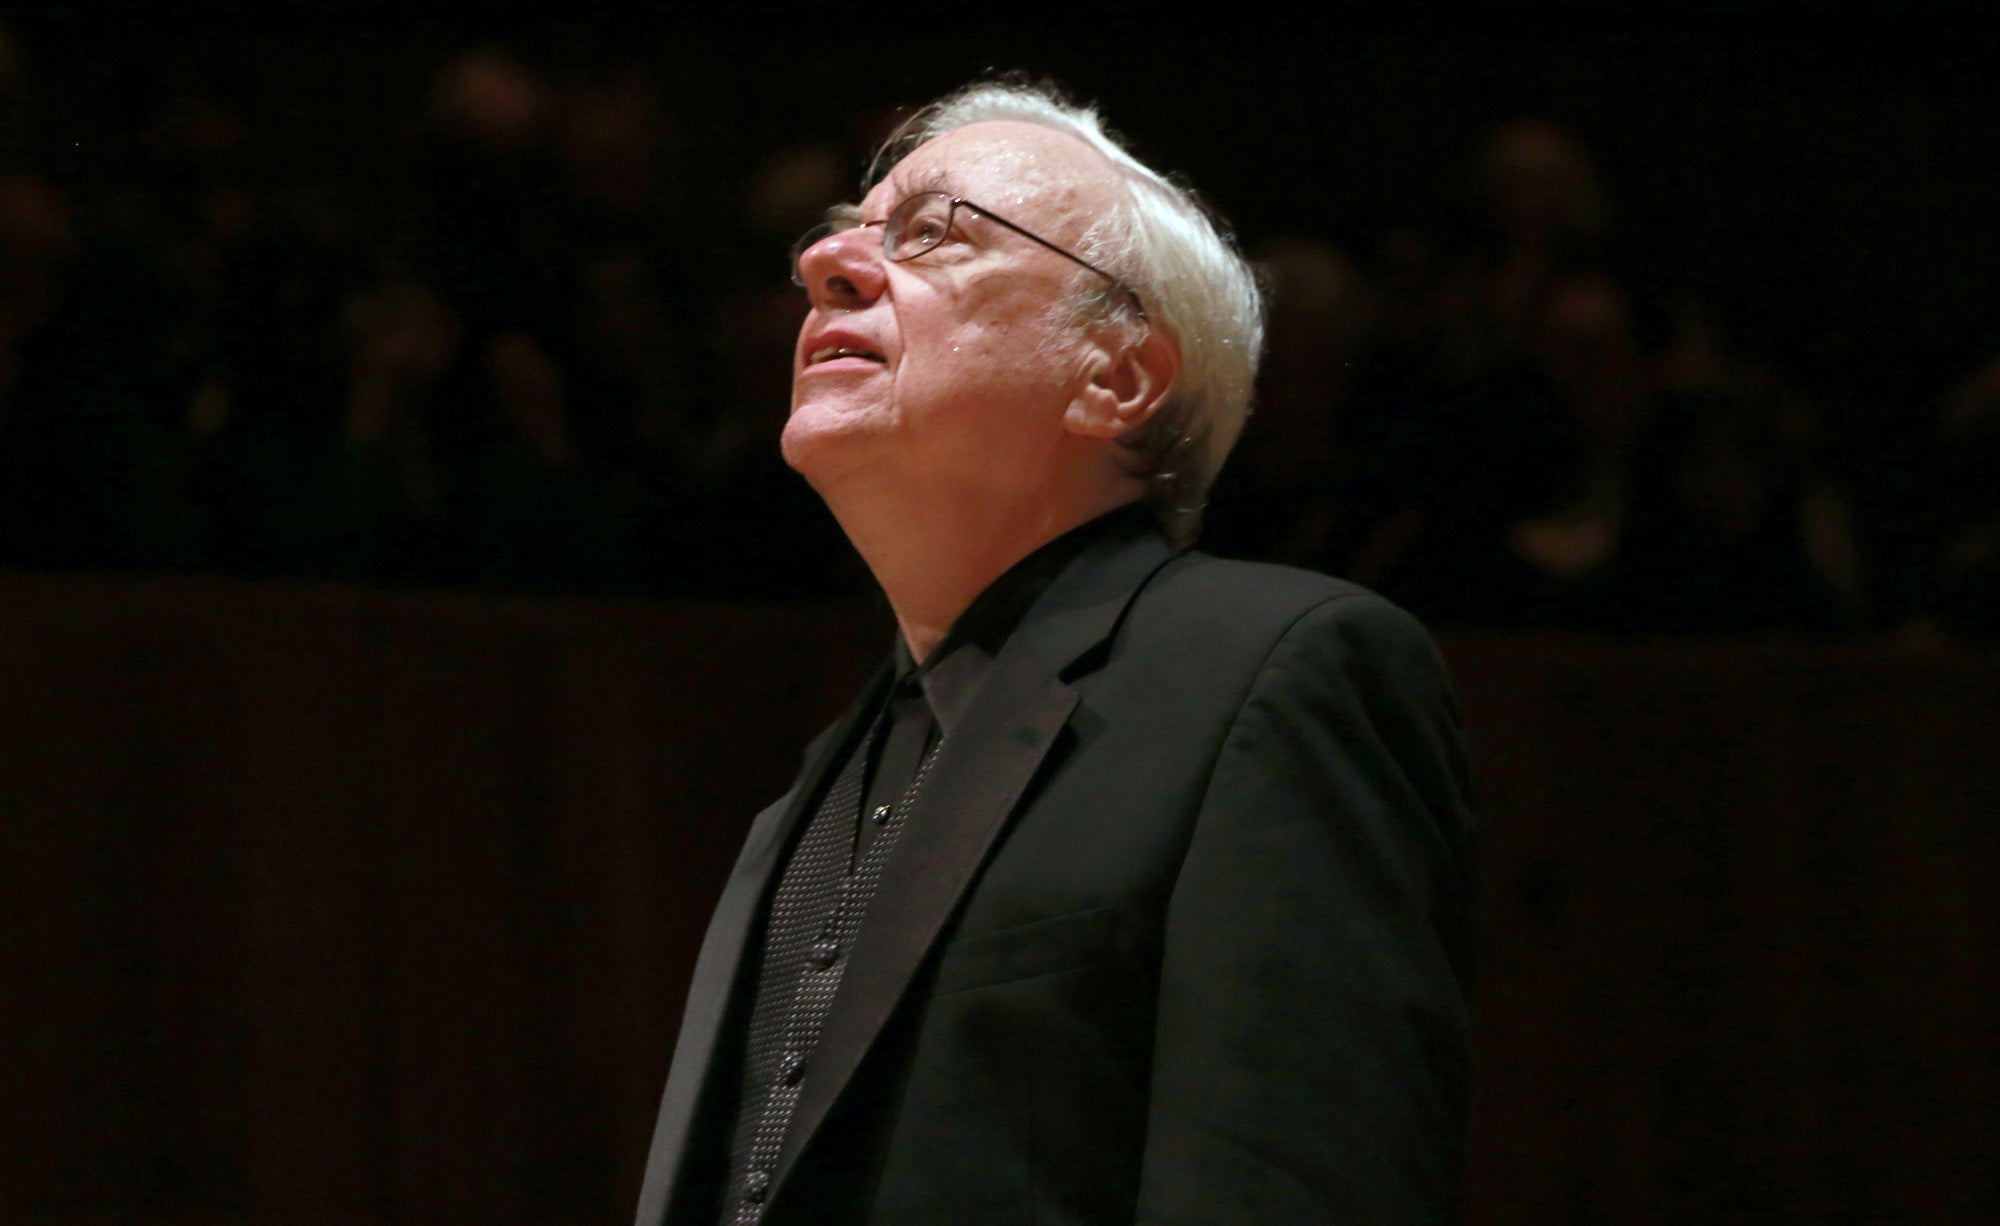 Plaudits: American pianist Richard Goode during a solo piano recital of the last three piano sonatas by Schubert as part of the Southbank Centre's International Piano Series